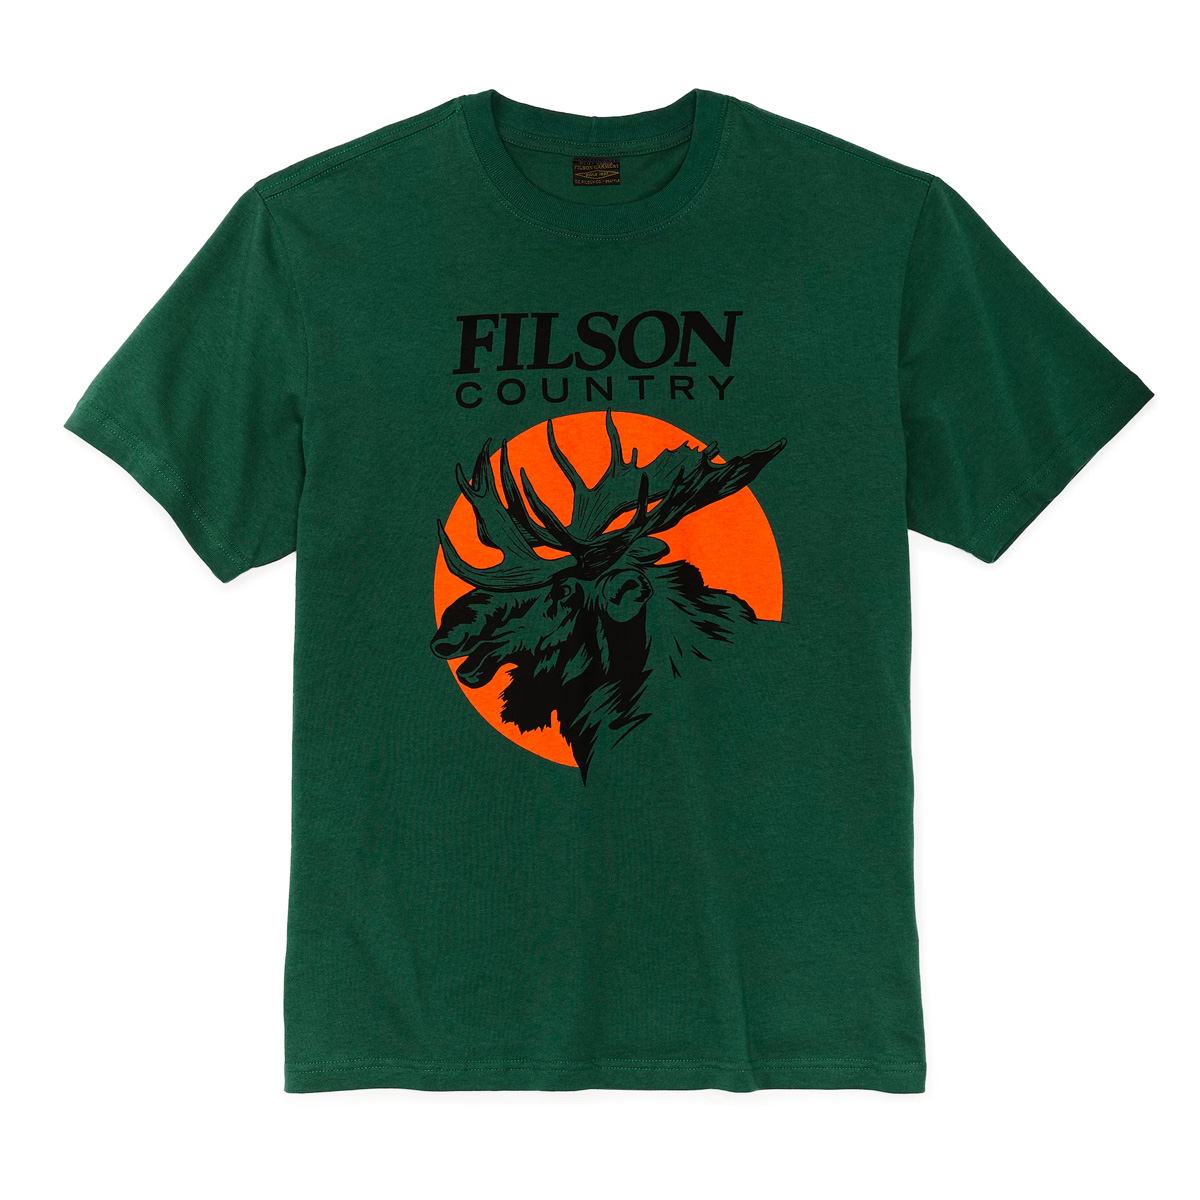 Filson Pioneer Graphic T-Shirt Green/Moose, a heavy-duty shirt with a dry-hand feel that maintains its structure for season after season of wear